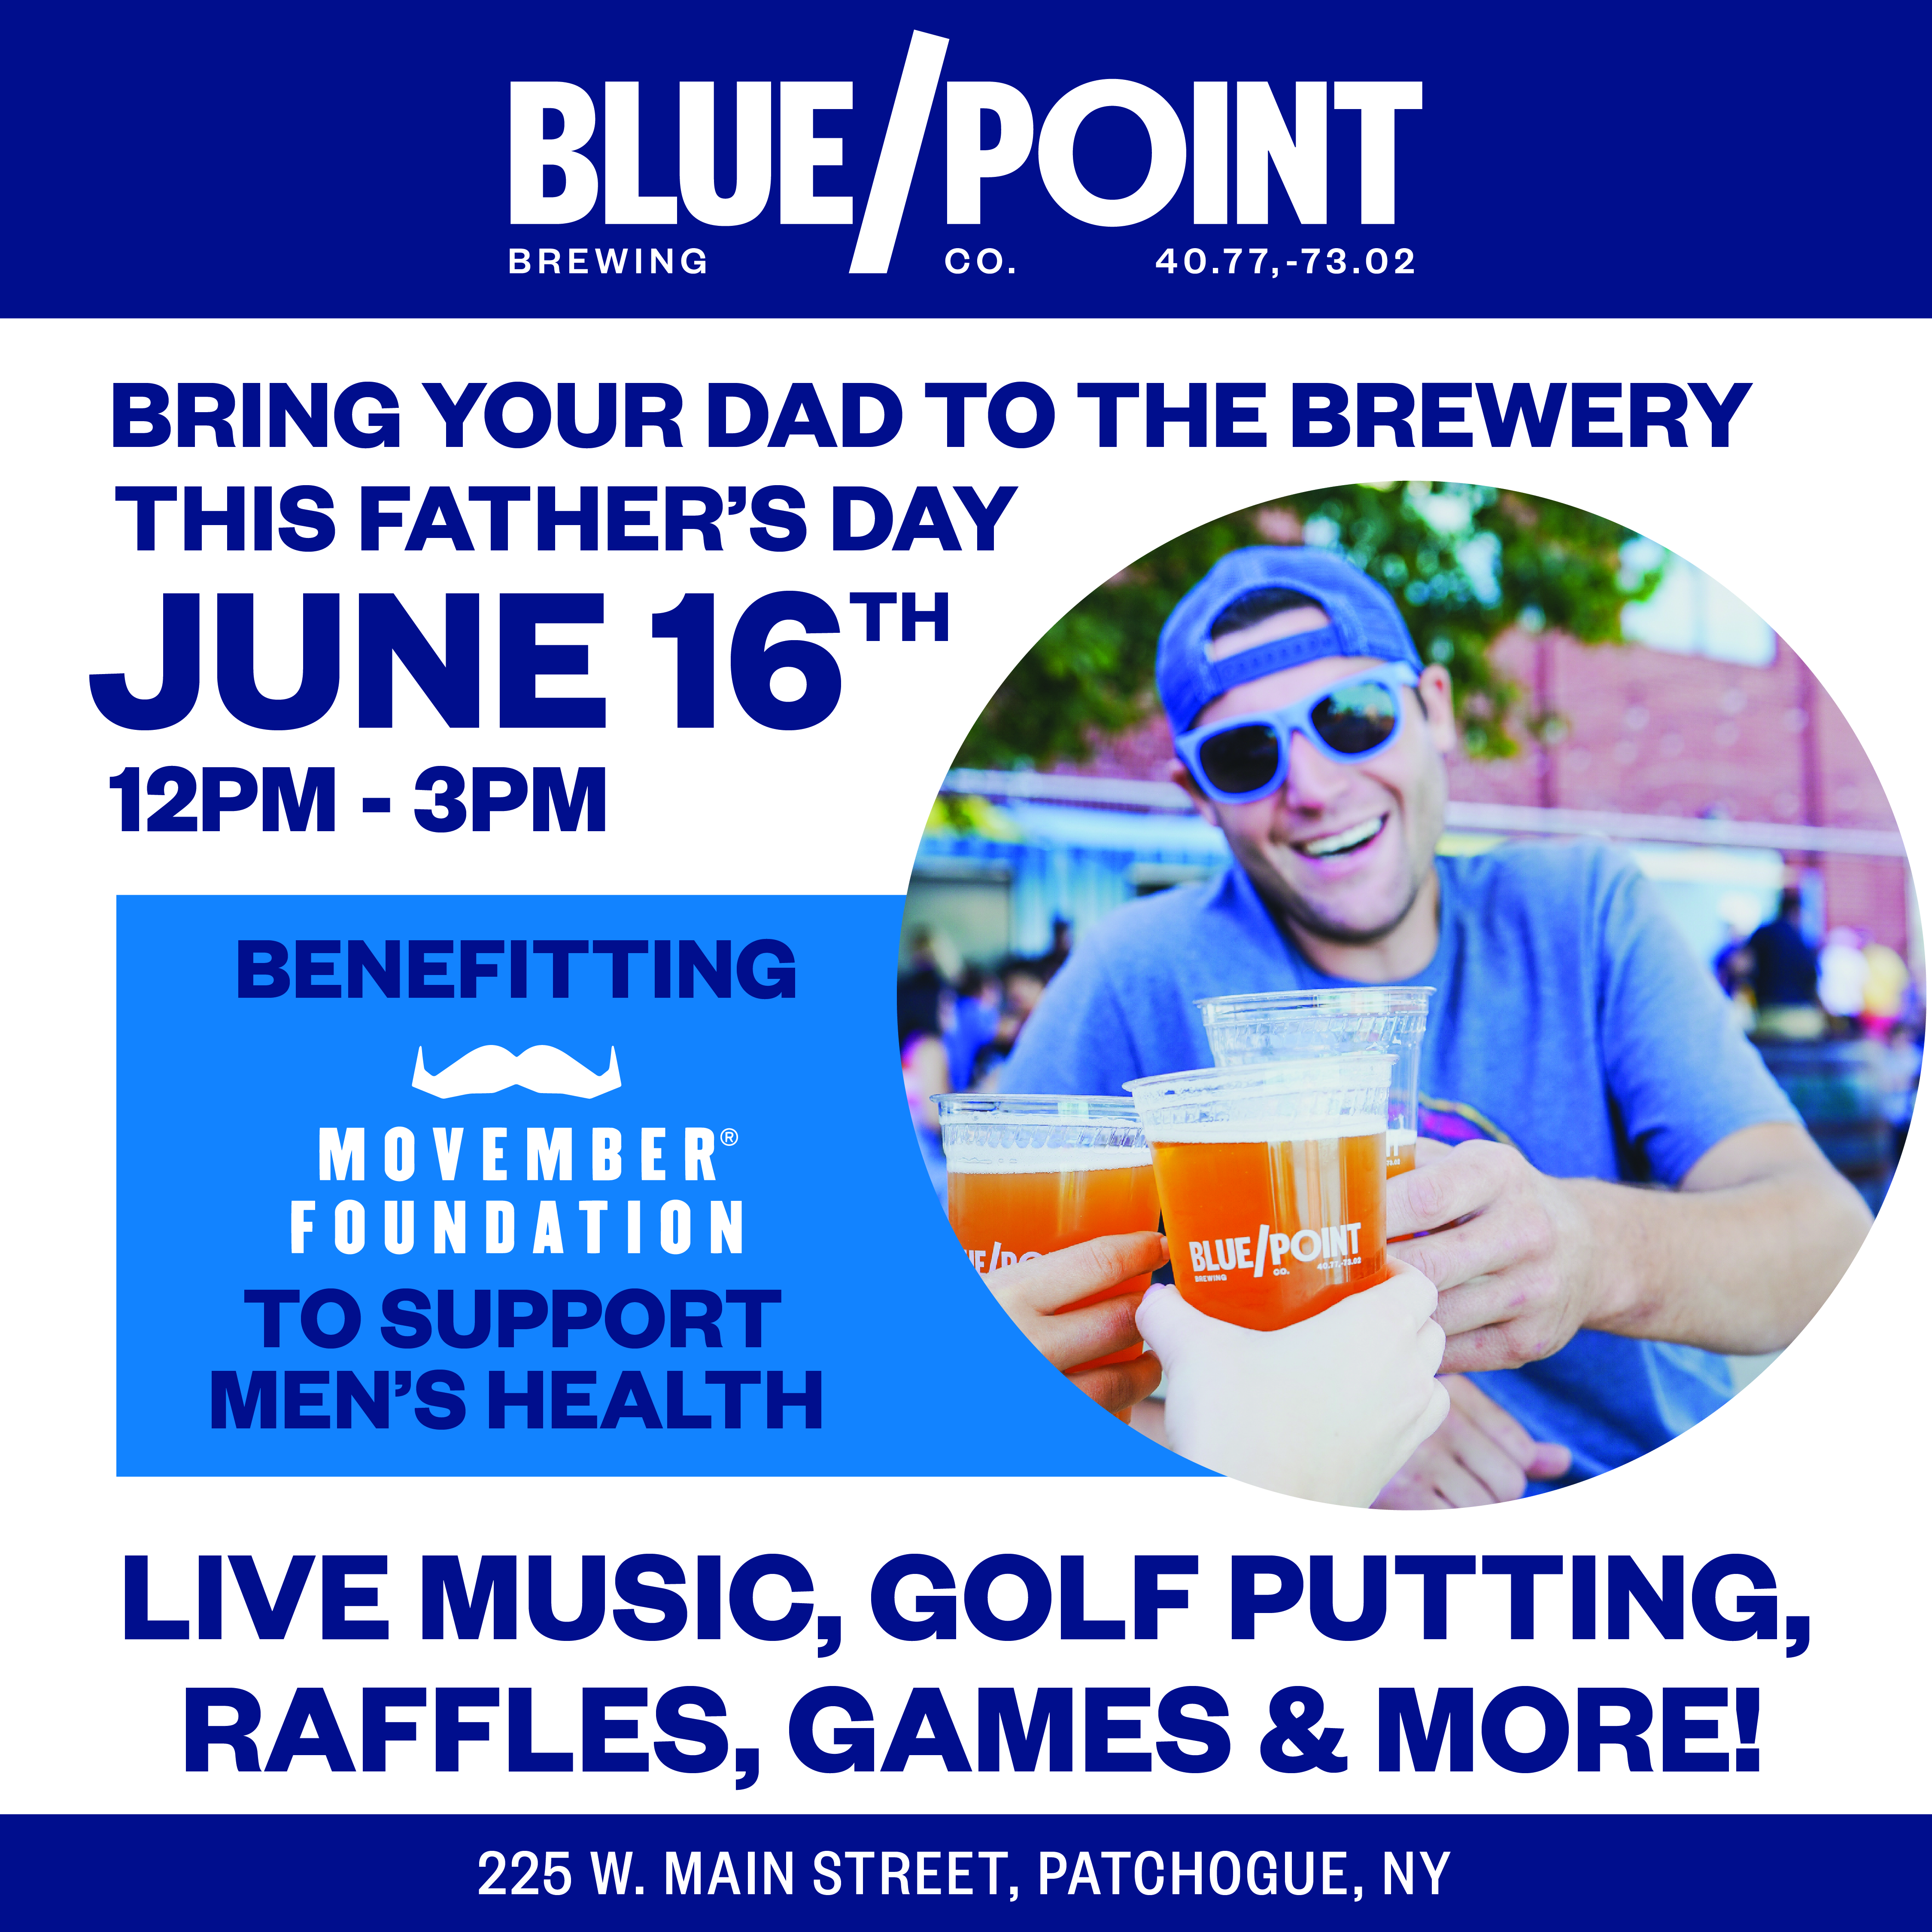 Official Poster for Blue Point Brewing's Father's Day Celebration